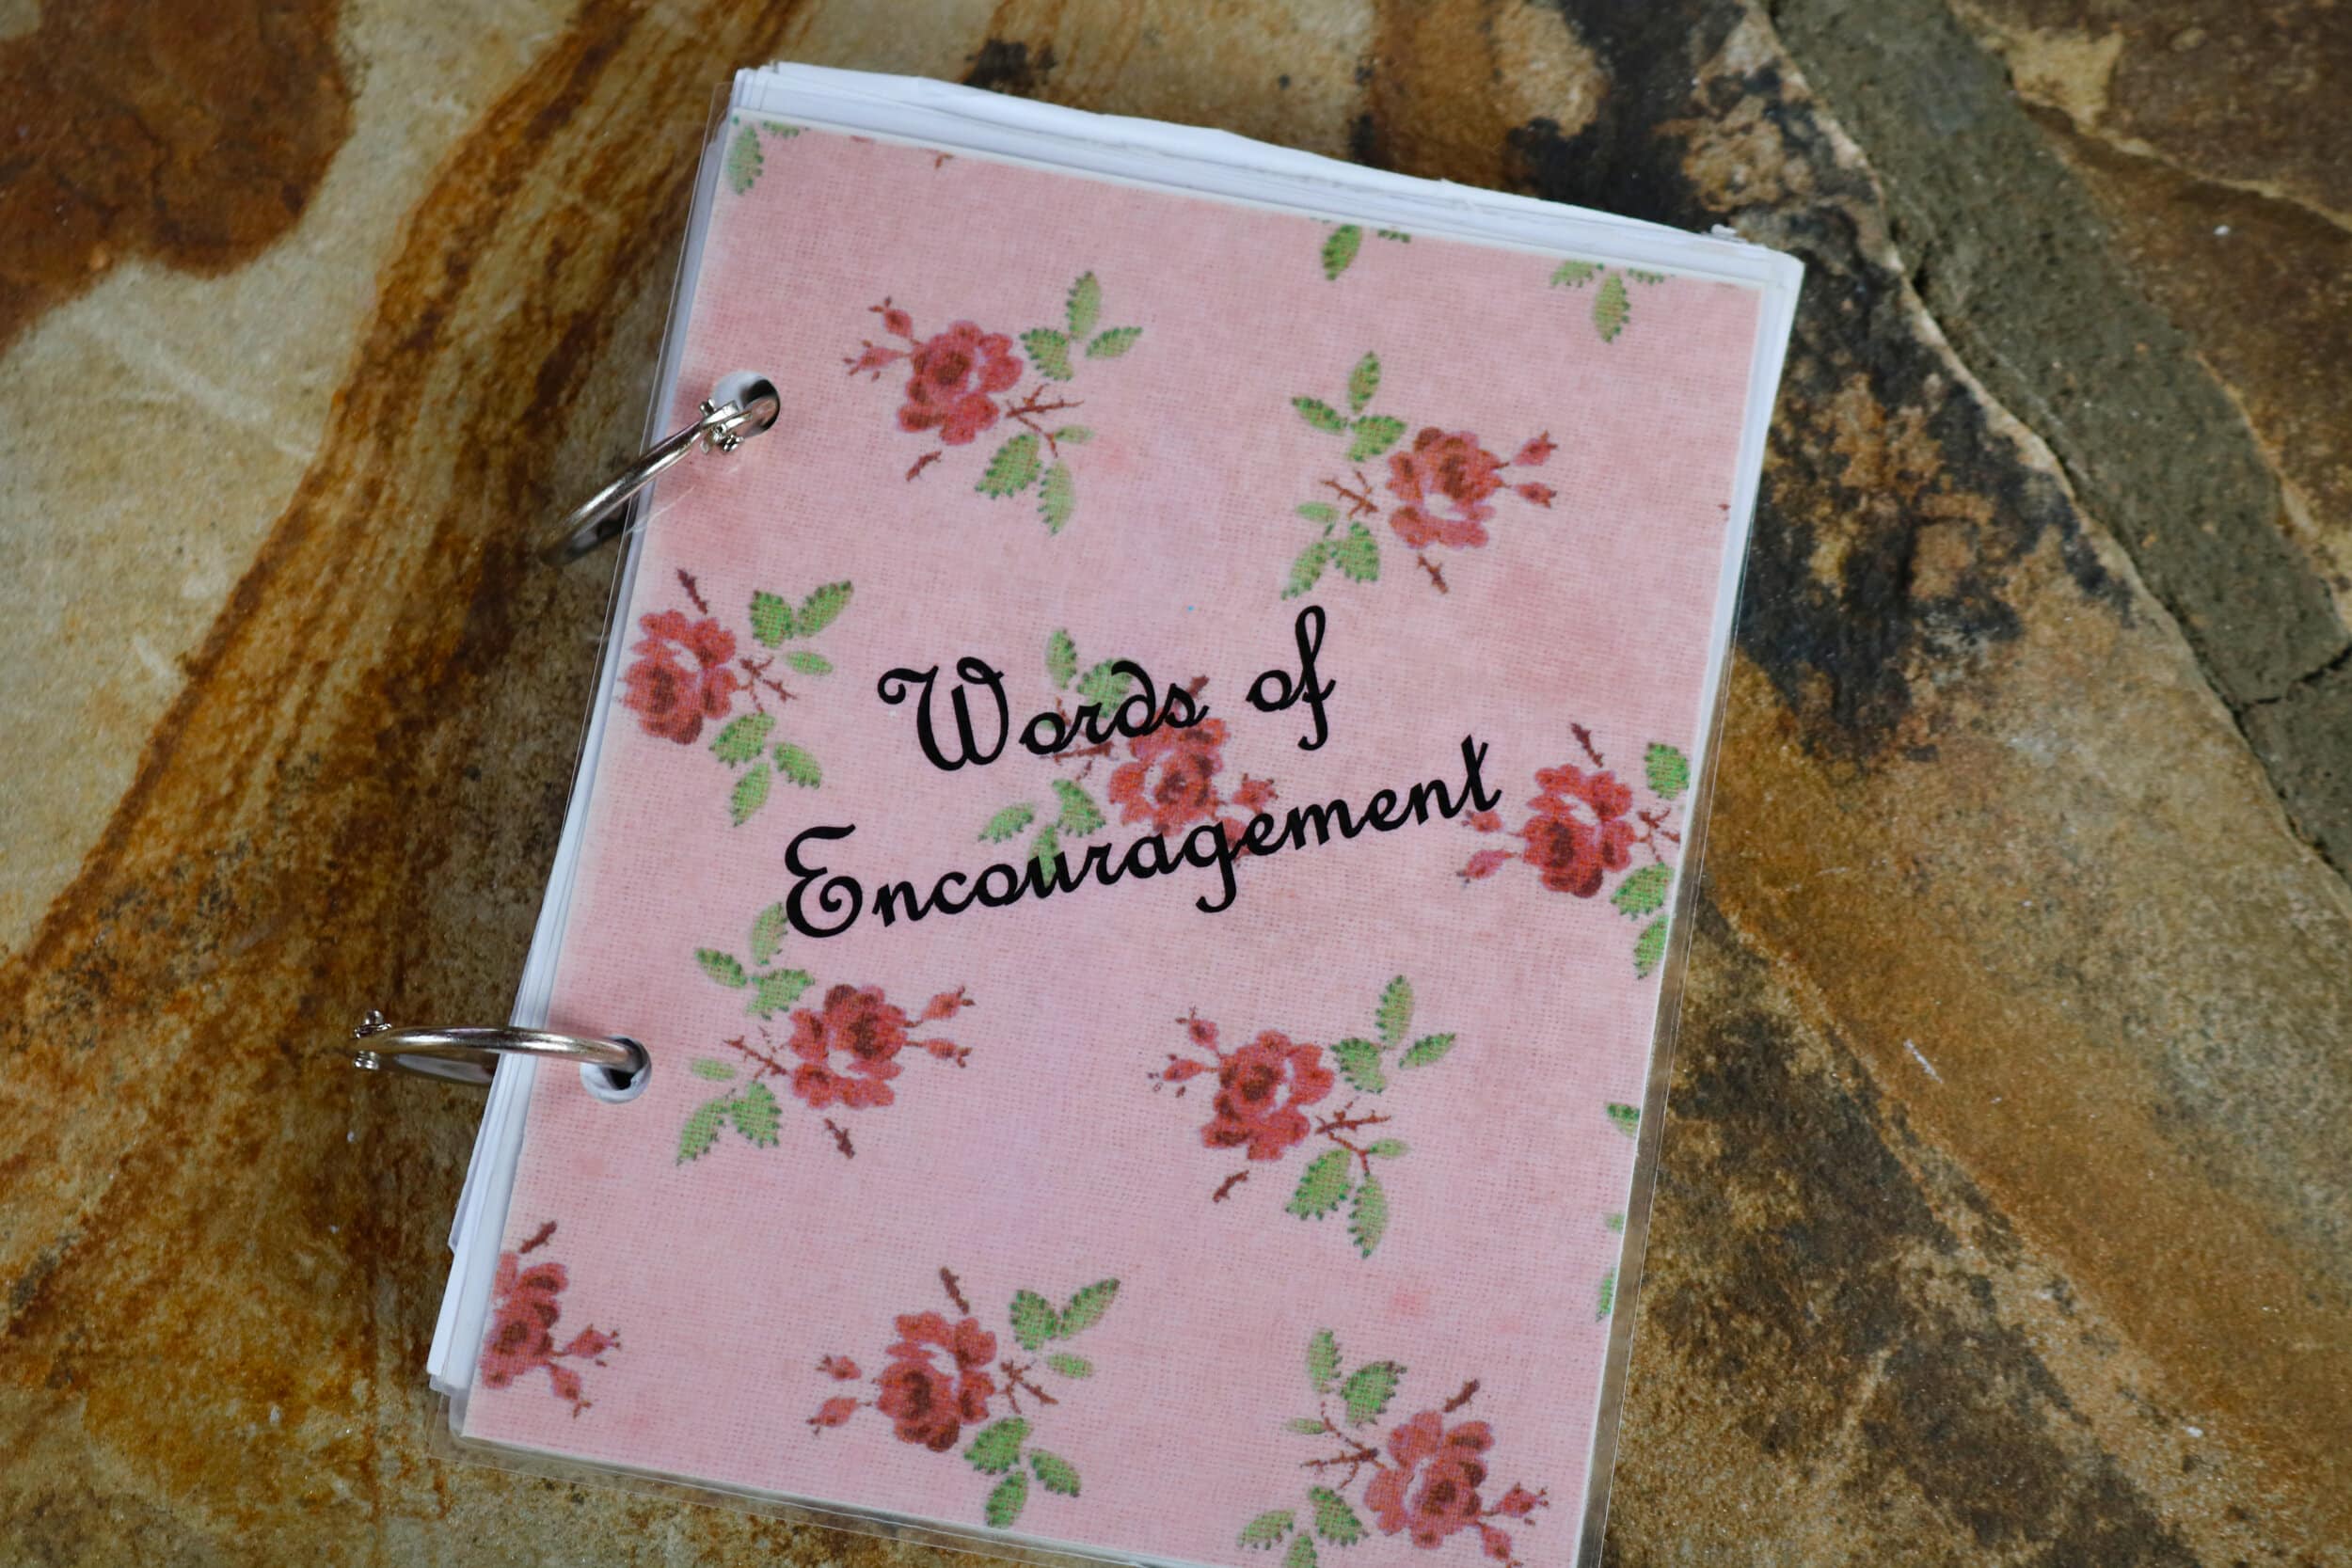 The Words of Encouragement booklet, where students and faculty can find words of encouragement left by other students and faculty.